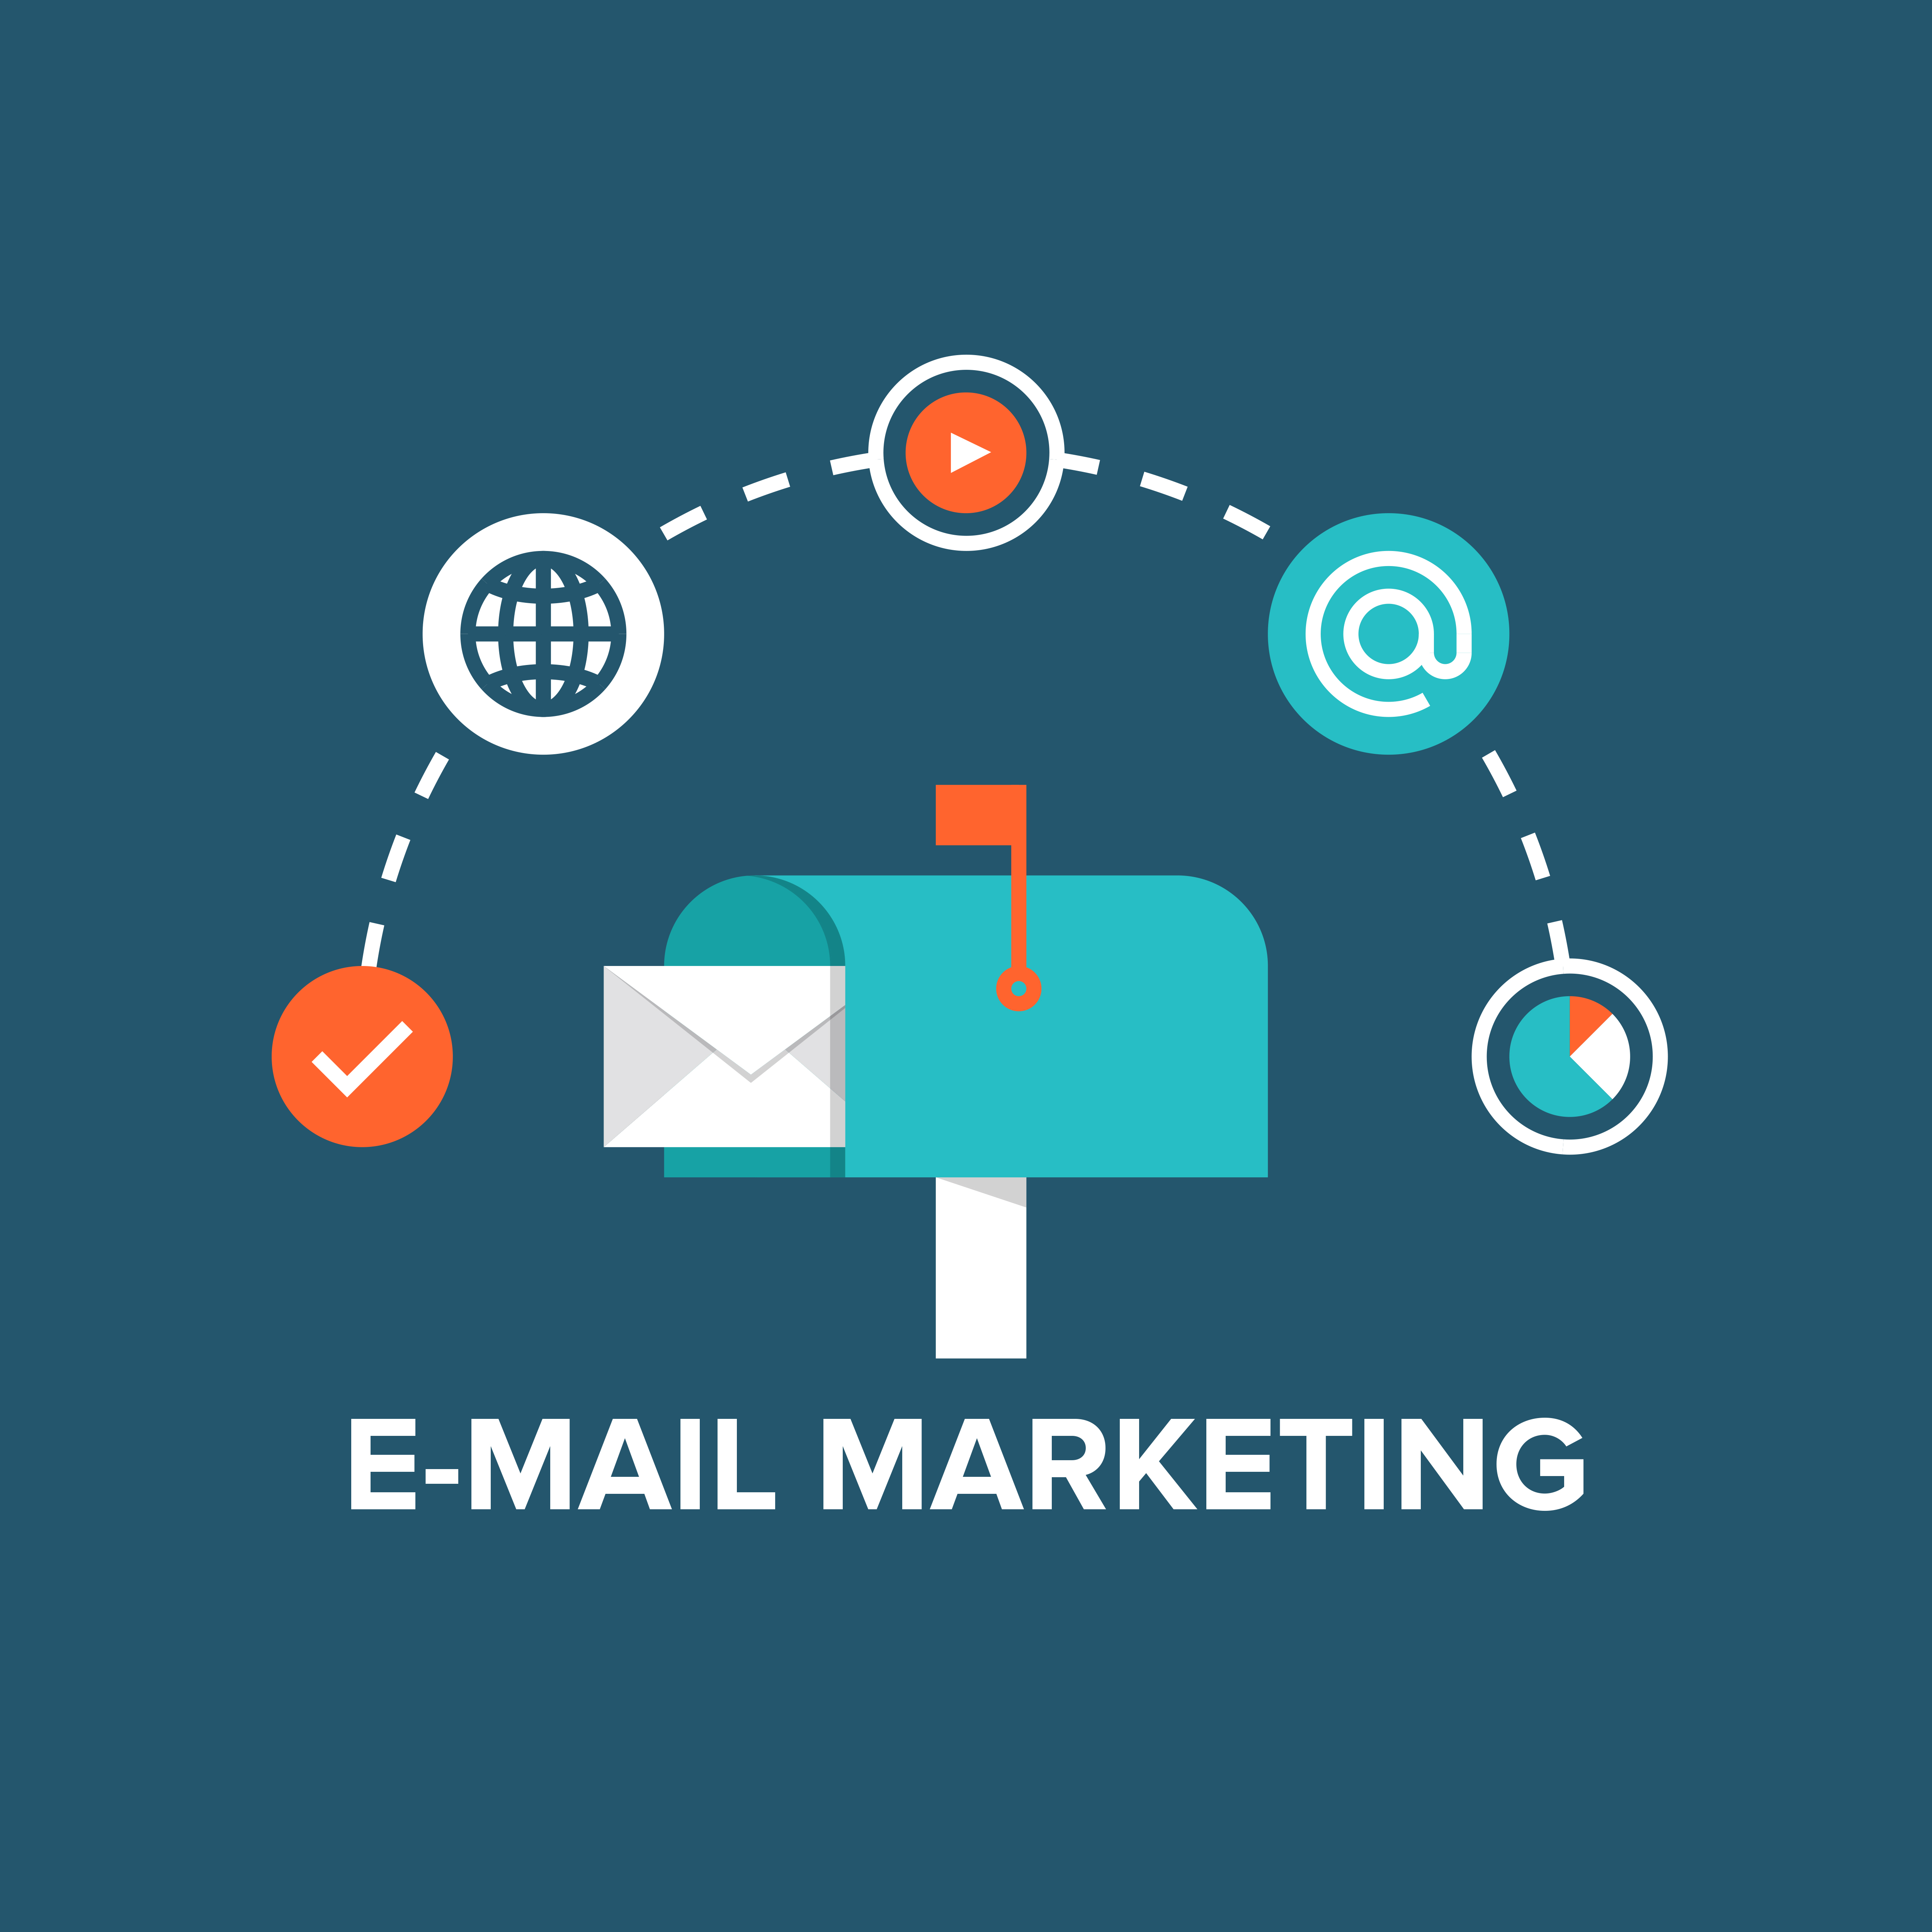 Email Marketing is a great strategy to grow your small business.